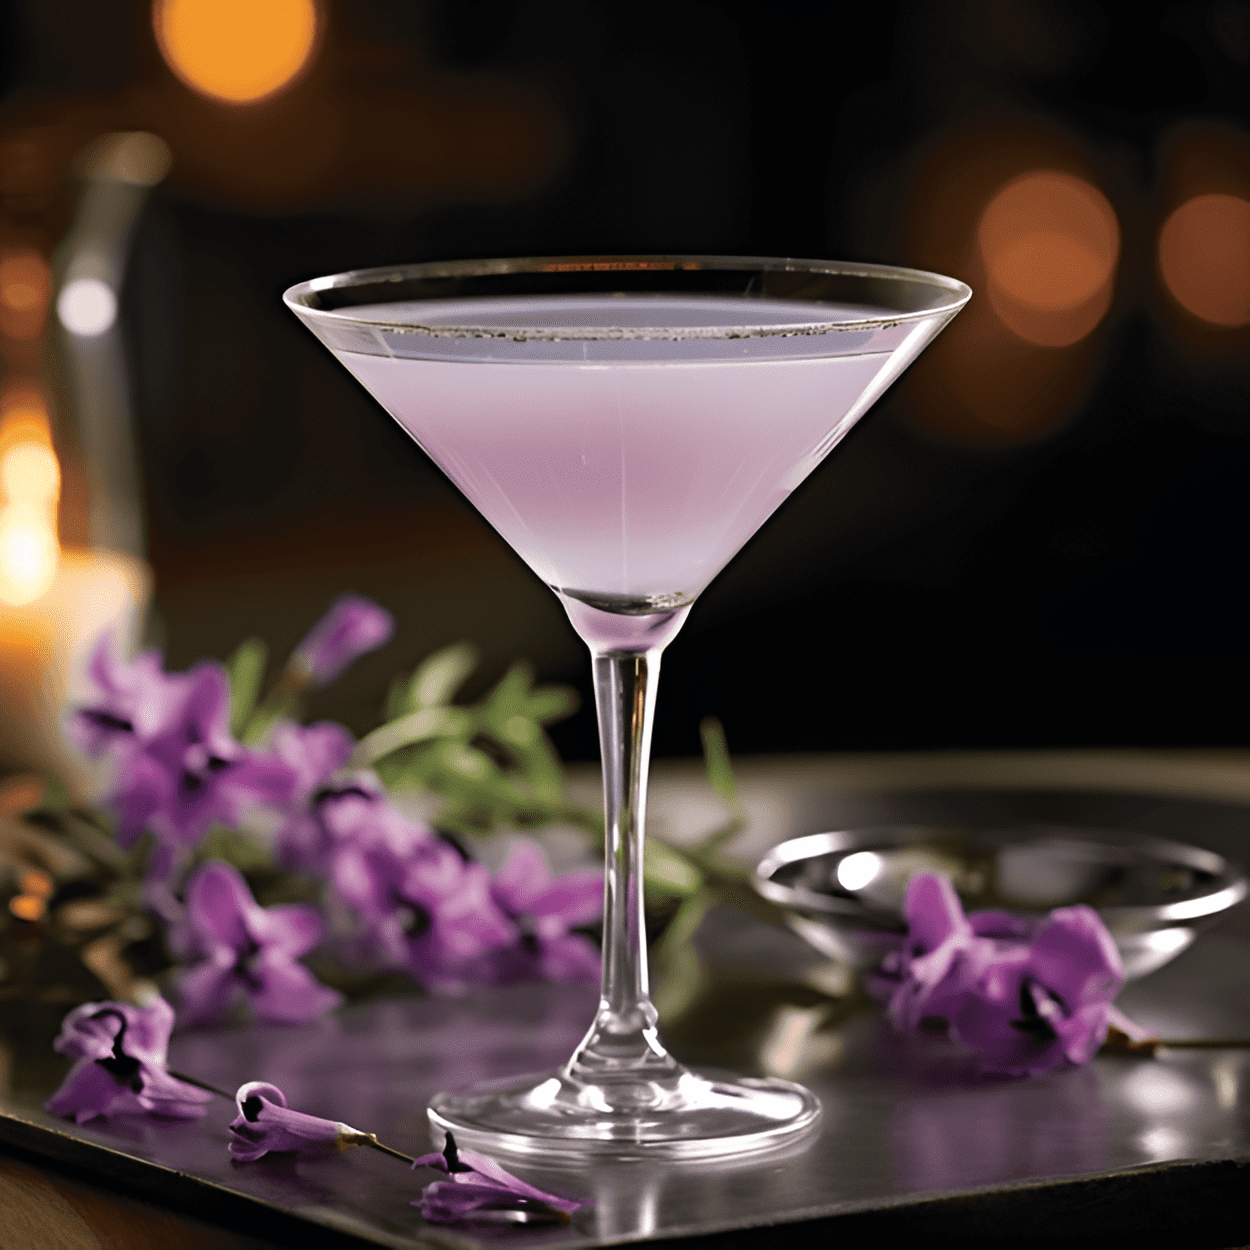 Lavender Martini Cocktail Recipe - The Lavender Martini is a delightful mix of sweet, floral, and slightly bitter flavors. The lavender syrup imparts a sweet floral note, while the gin provides a slight bitterness. The lemon juice adds a touch of acidity, balancing out the sweetness.